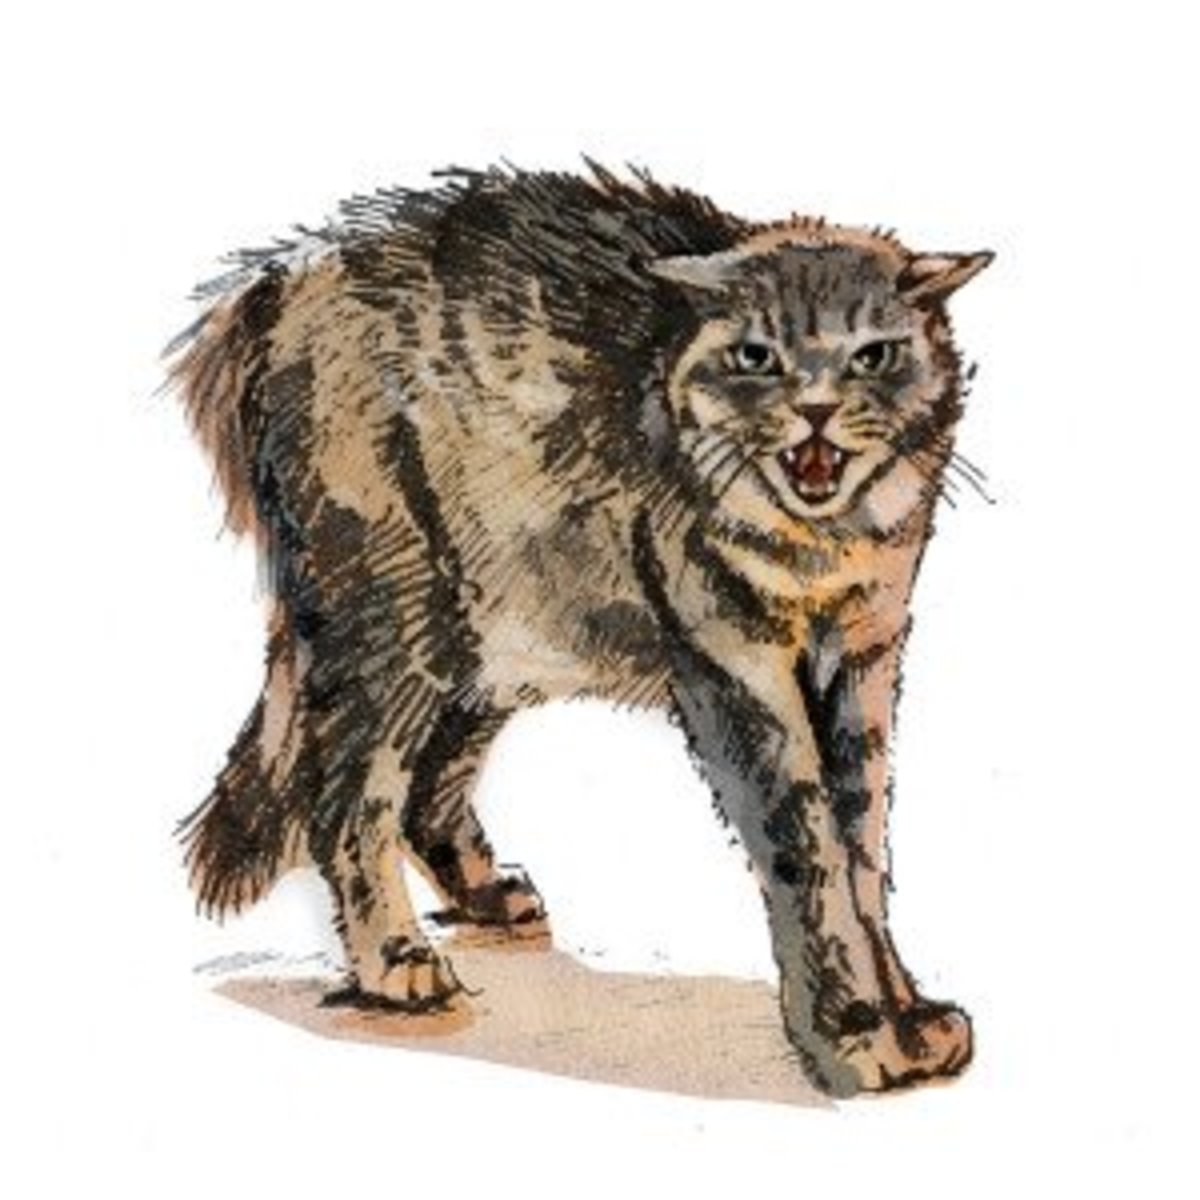 People feeding feral cats should not mistake familarity with affection; they will become  aggressive and lash out if threatened or cornered (signs of aggression include ears back and eyes dilated). Stray cats may be approachable; feral cats are not.